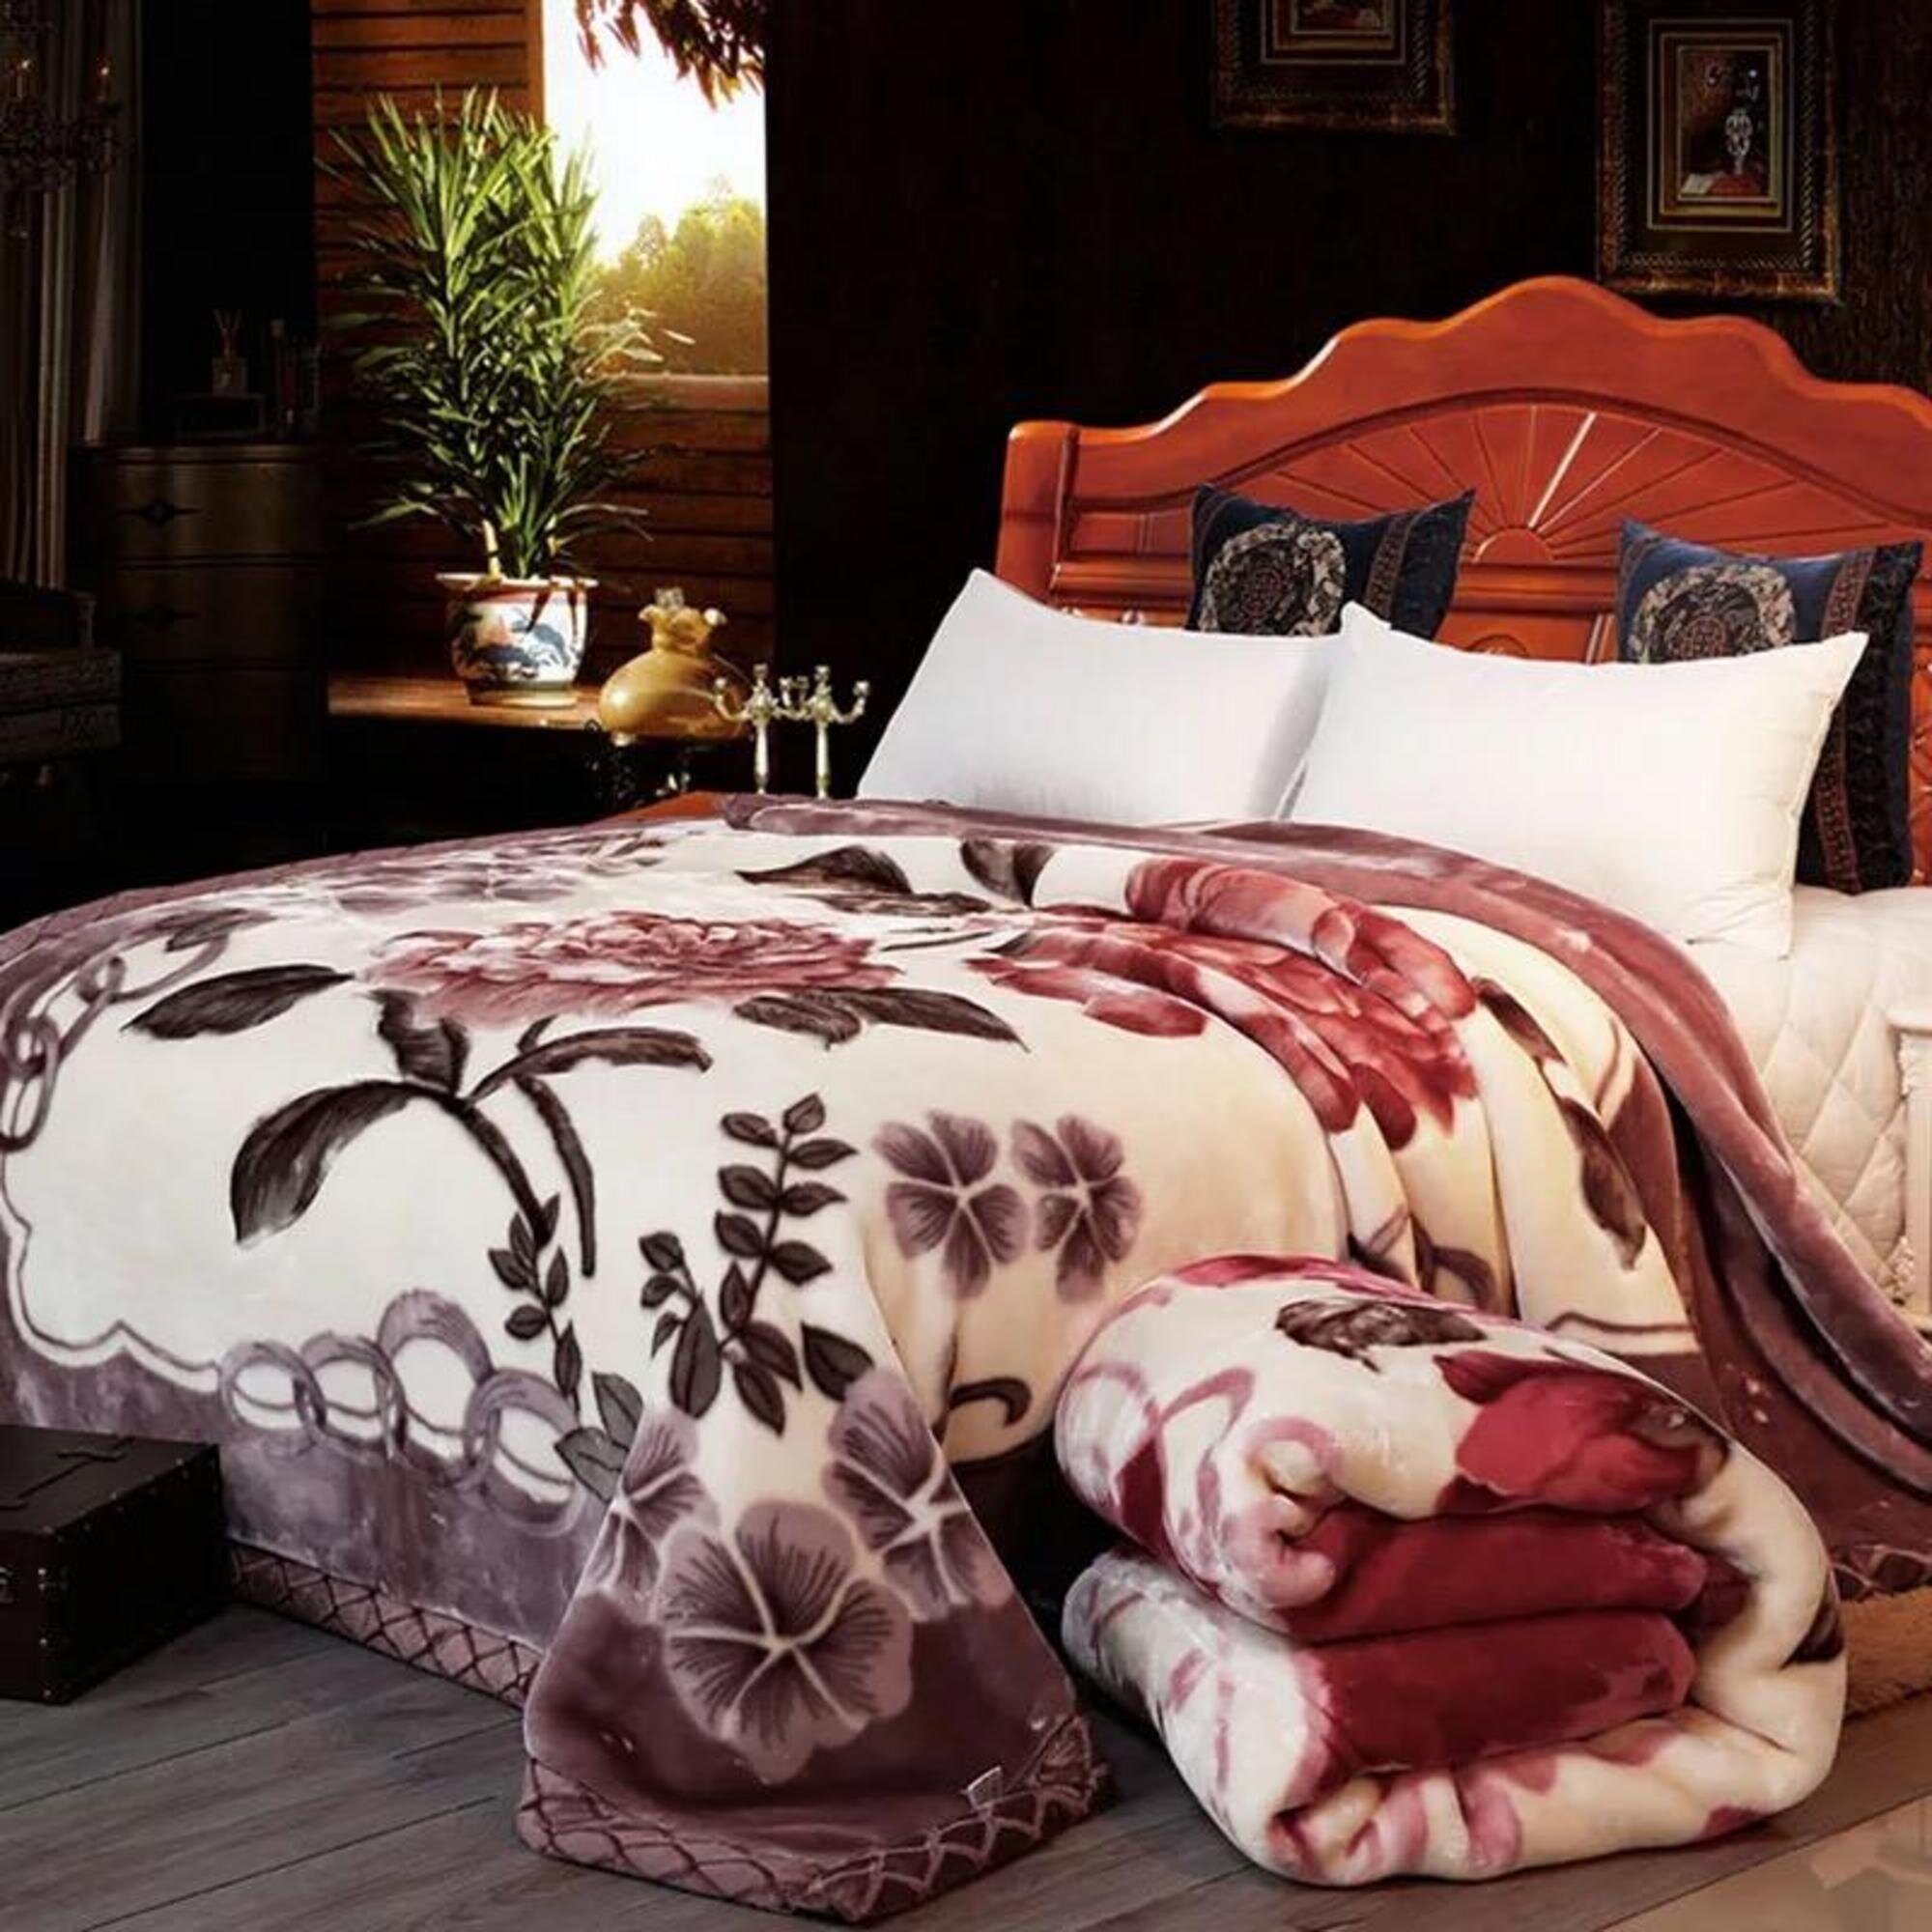 Large Soft Warm Velvet Throw Over Bed Plush Bedspread Double King Bed Blanket 